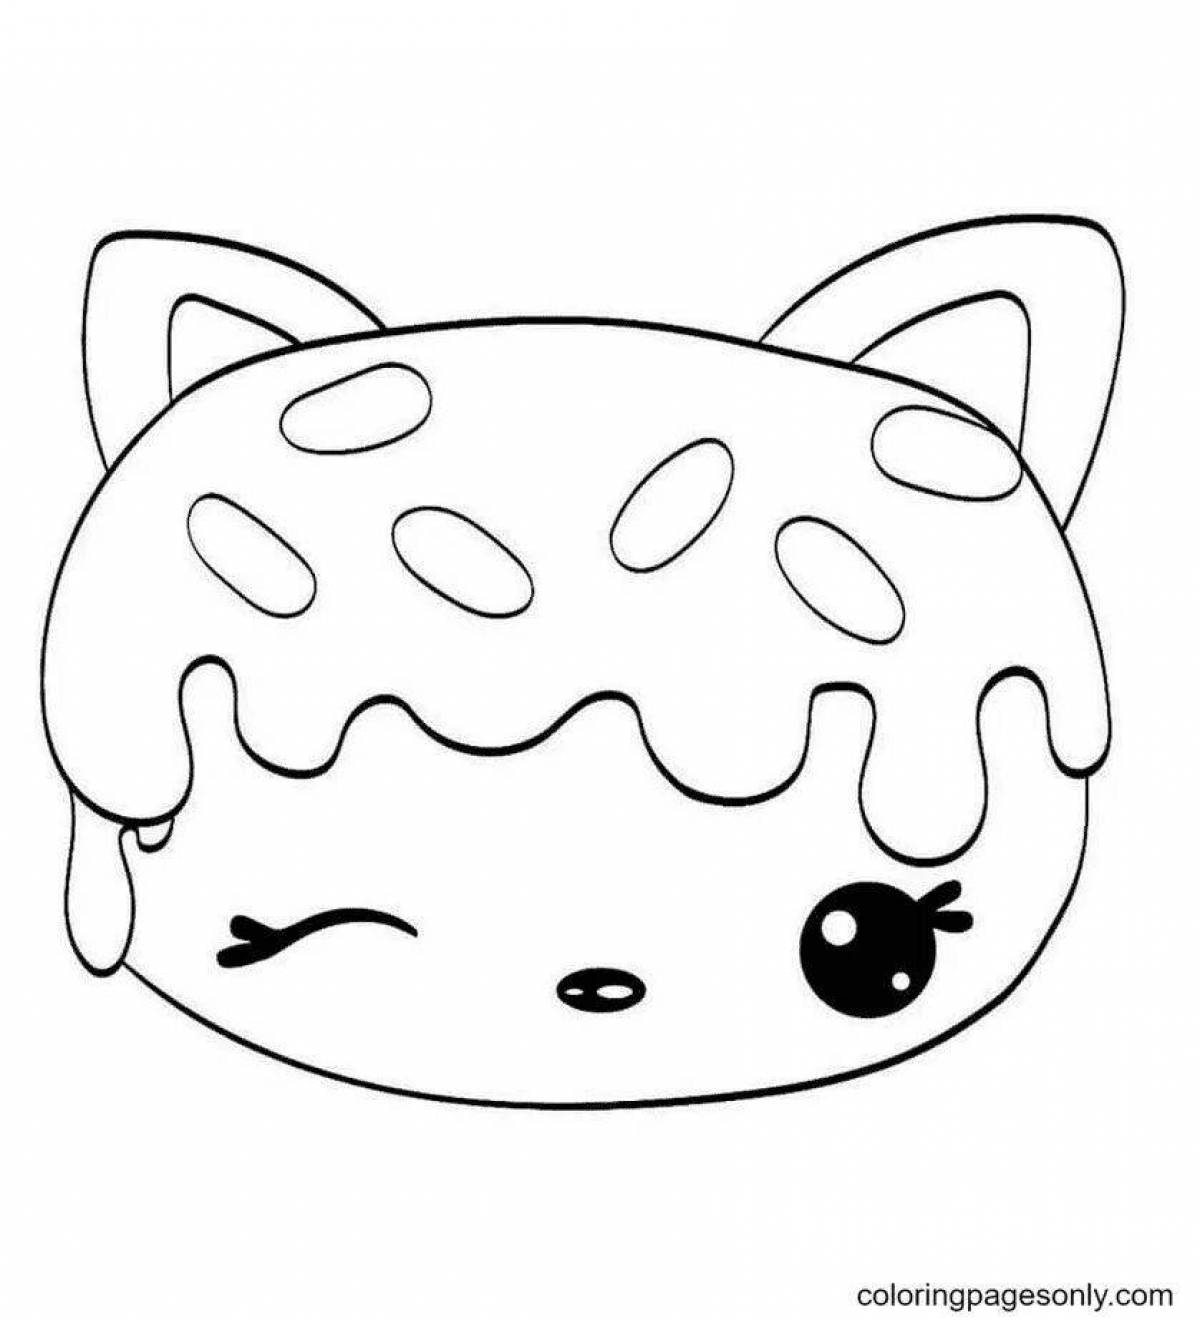 Coloring page amazing cat donut